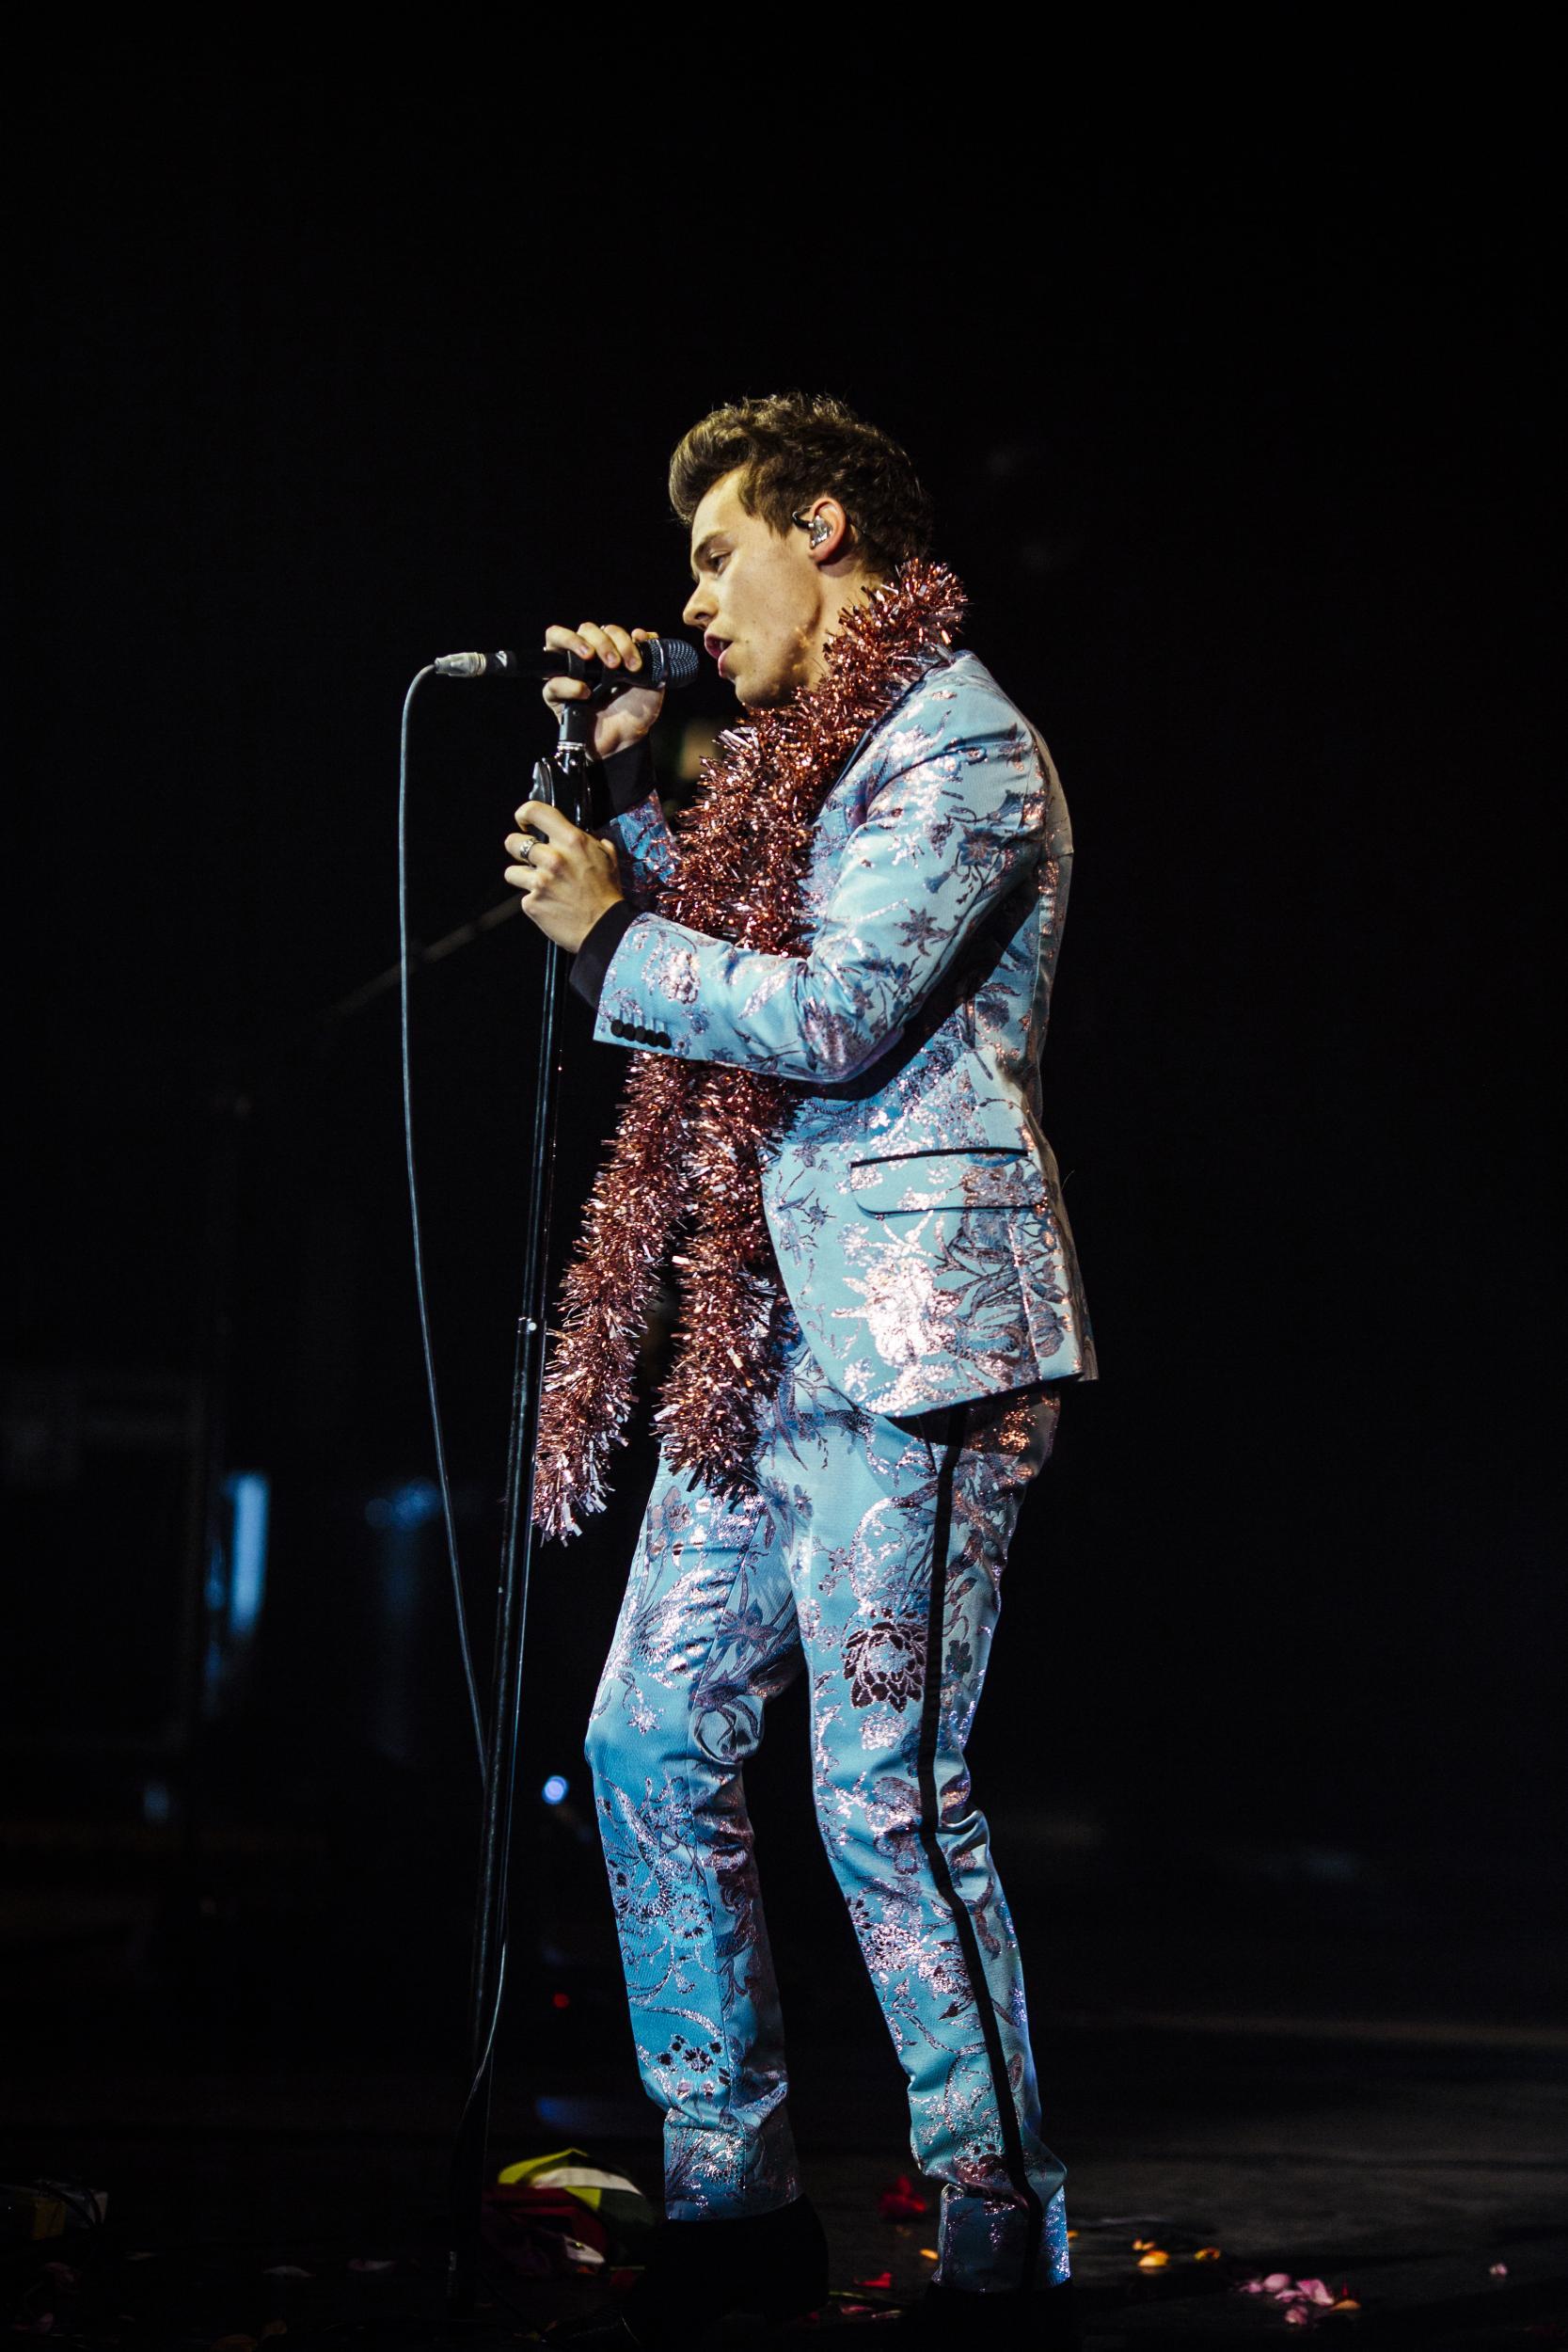 Harry Styles performs at the Eventim Apollo in London